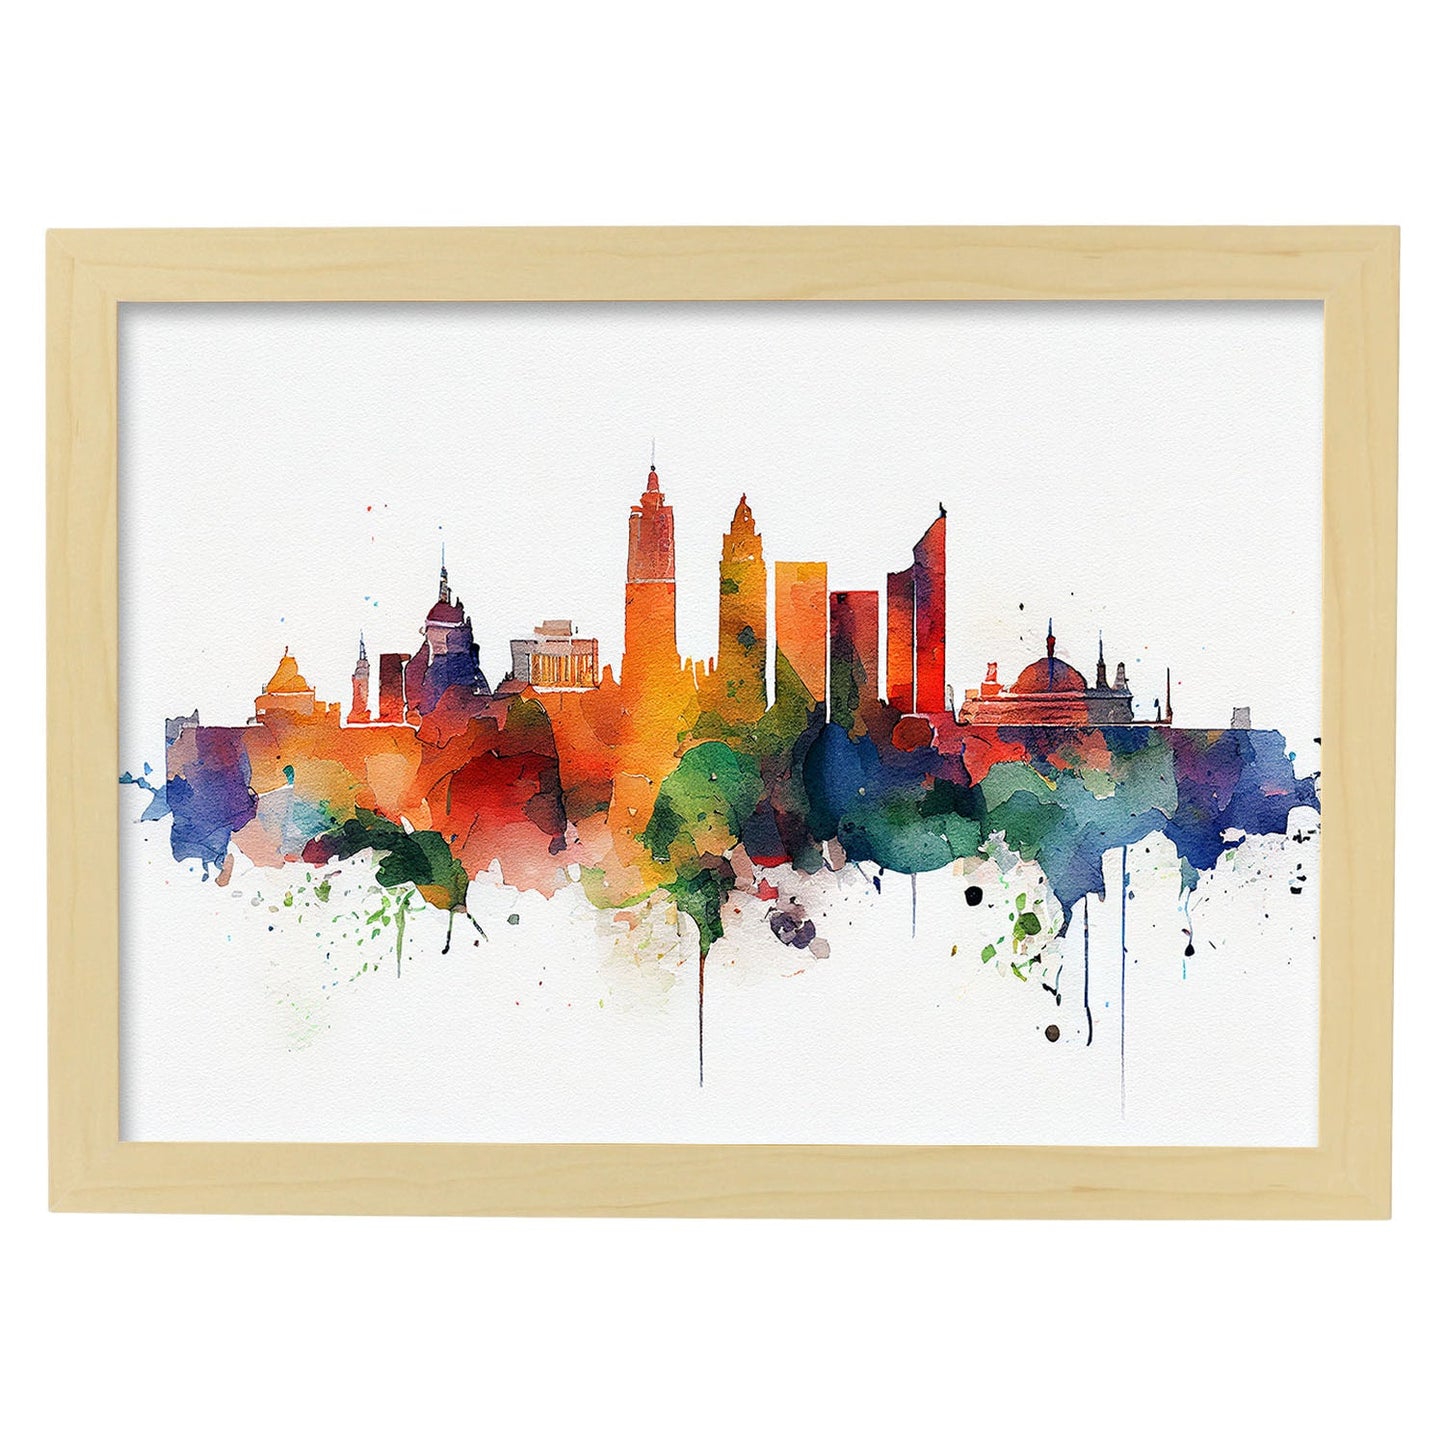 Nacnic watercolor of a skyline of the city of Madrid_3. Aesthetic Wall Art Prints for Bedroom or Living Room Design.-Artwork-Nacnic-A4-Marco Madera Clara-Nacnic Estudio SL